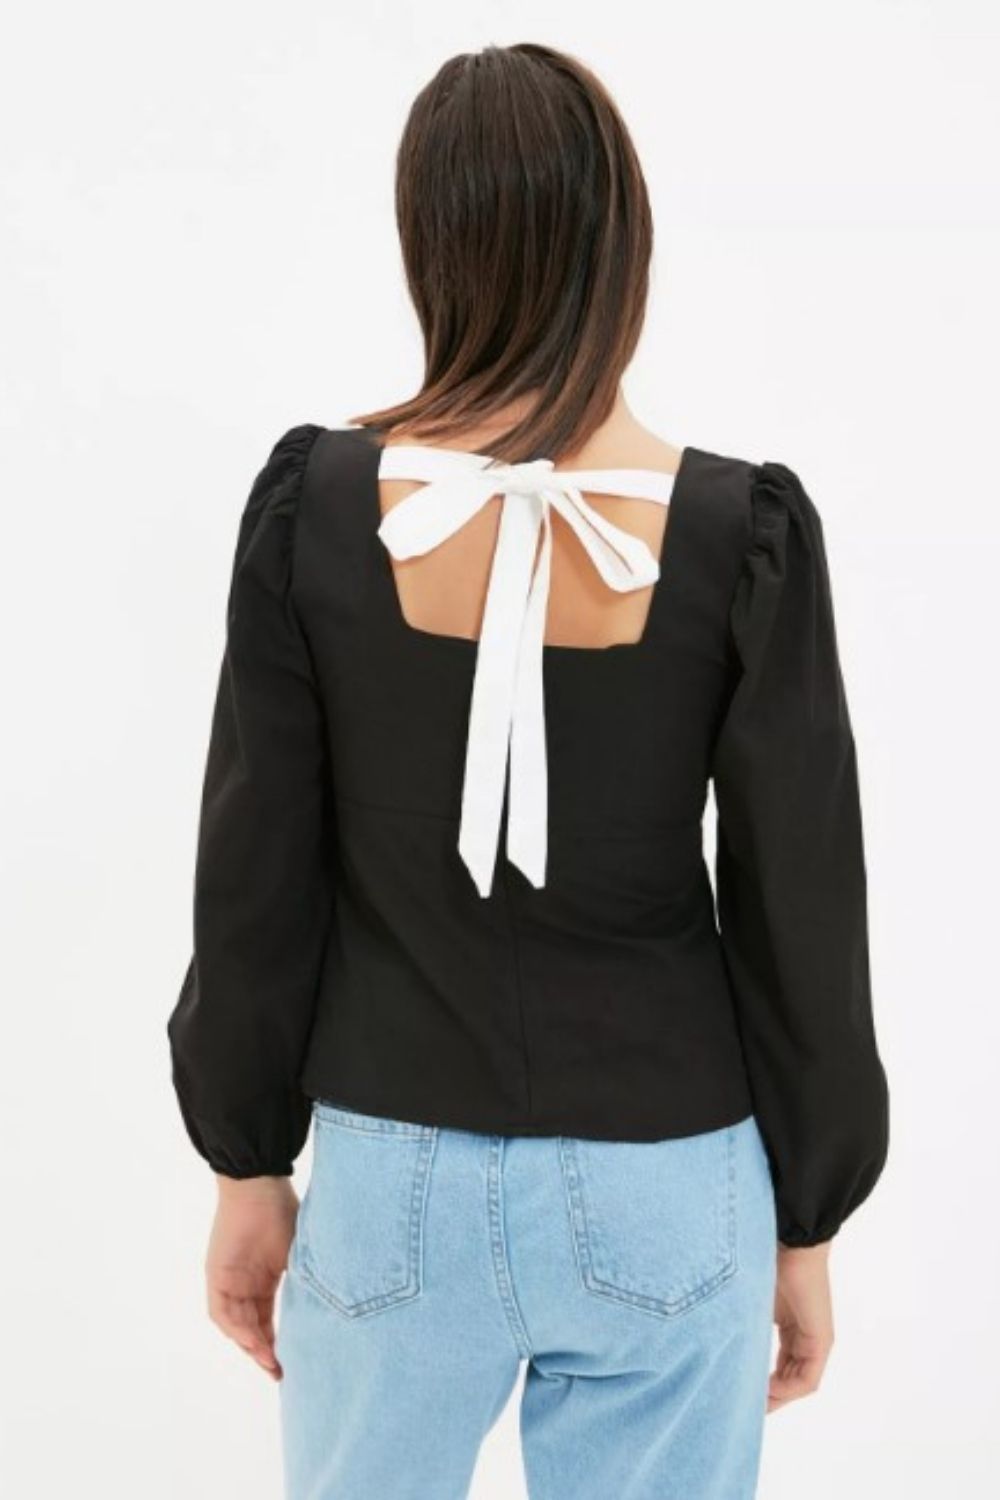 Dont Be Silly Black Square Neckline Full Sleeve Top